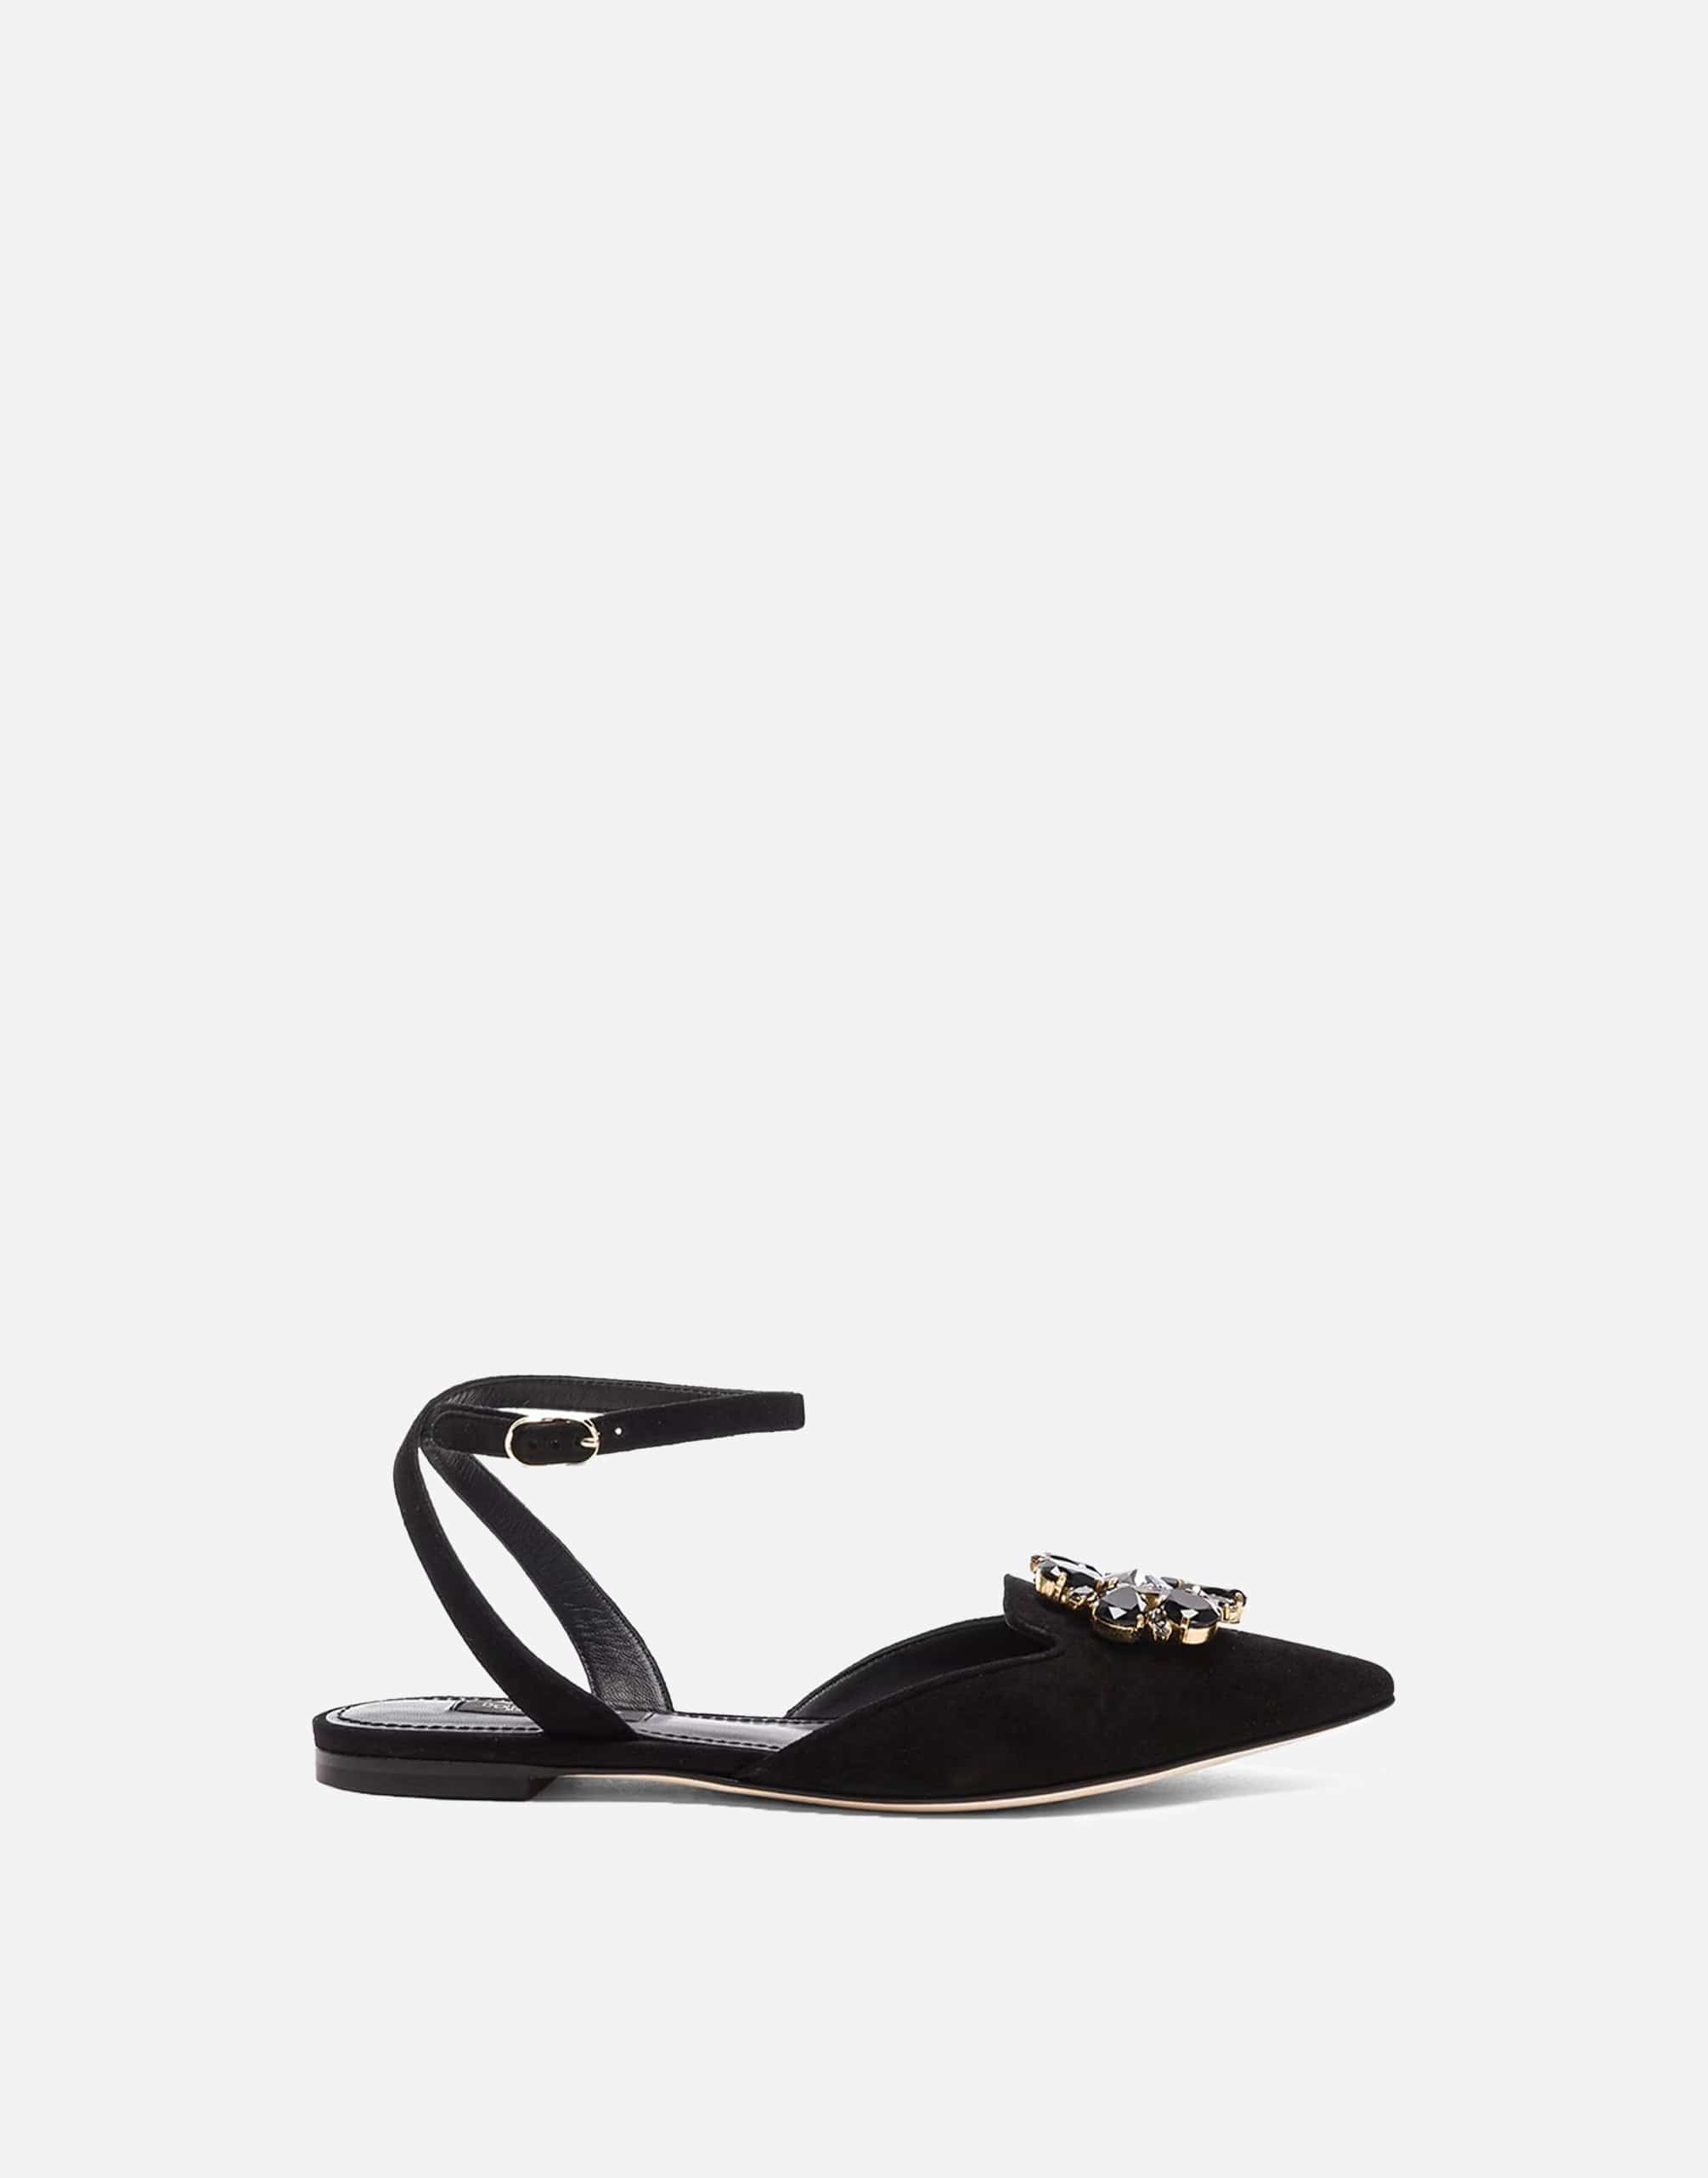 Dolce & Gabbana Flats With Ankle-Strap And Crystal Embellishments